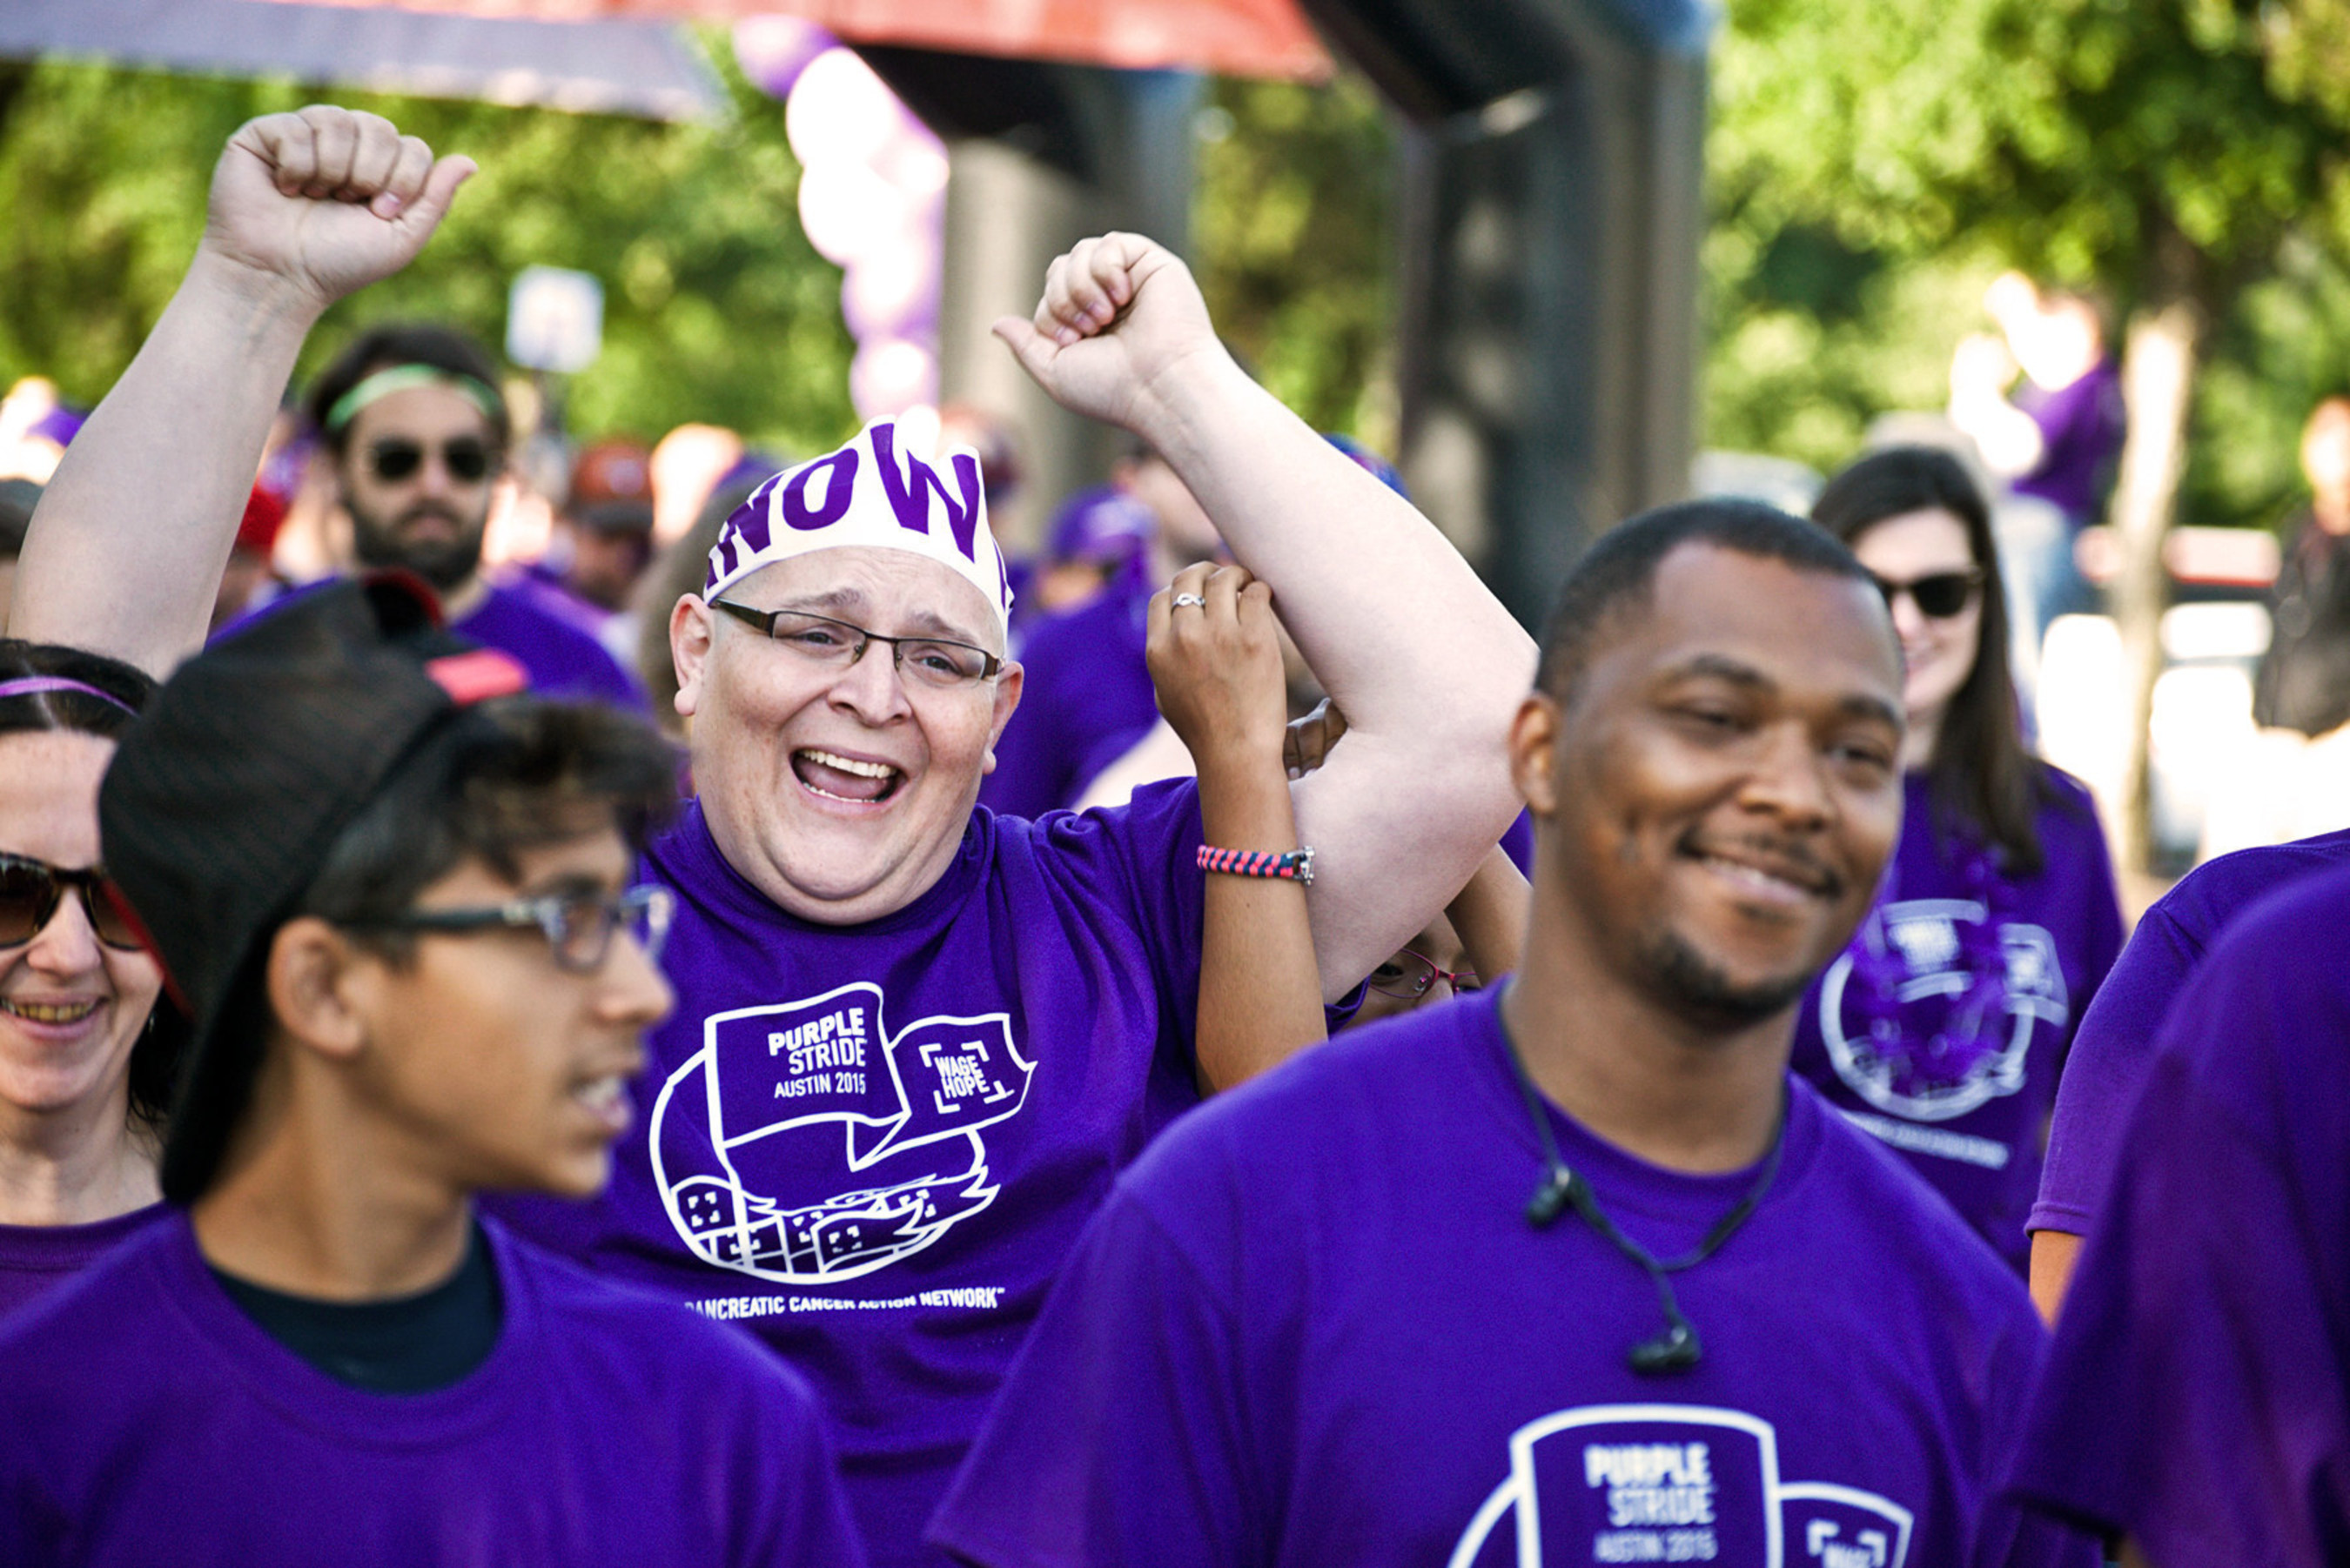 PurpleStride participants Wage Hope in the fight against pancreatic cancer